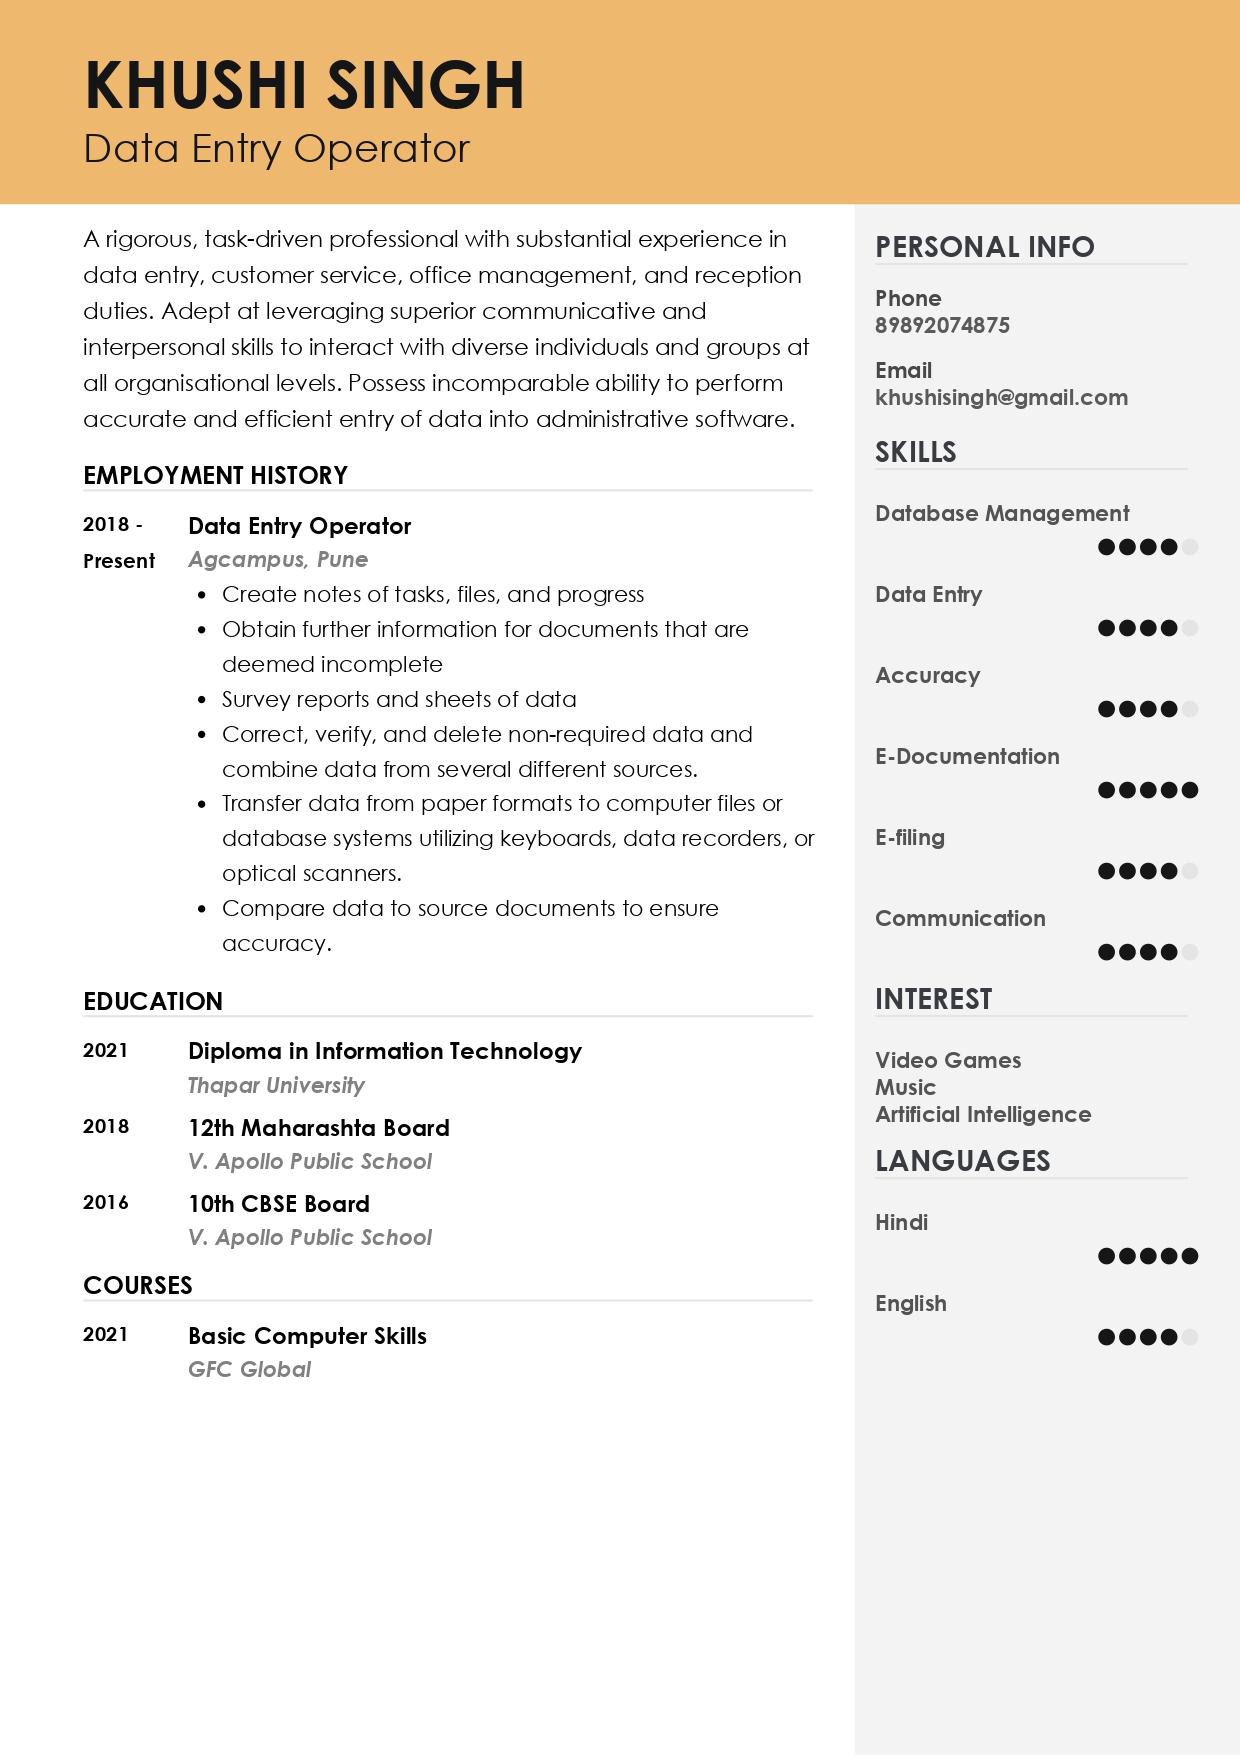 Sample Resume of Data Entry Operator | Free Resume Templates & Samples on Resumod.co